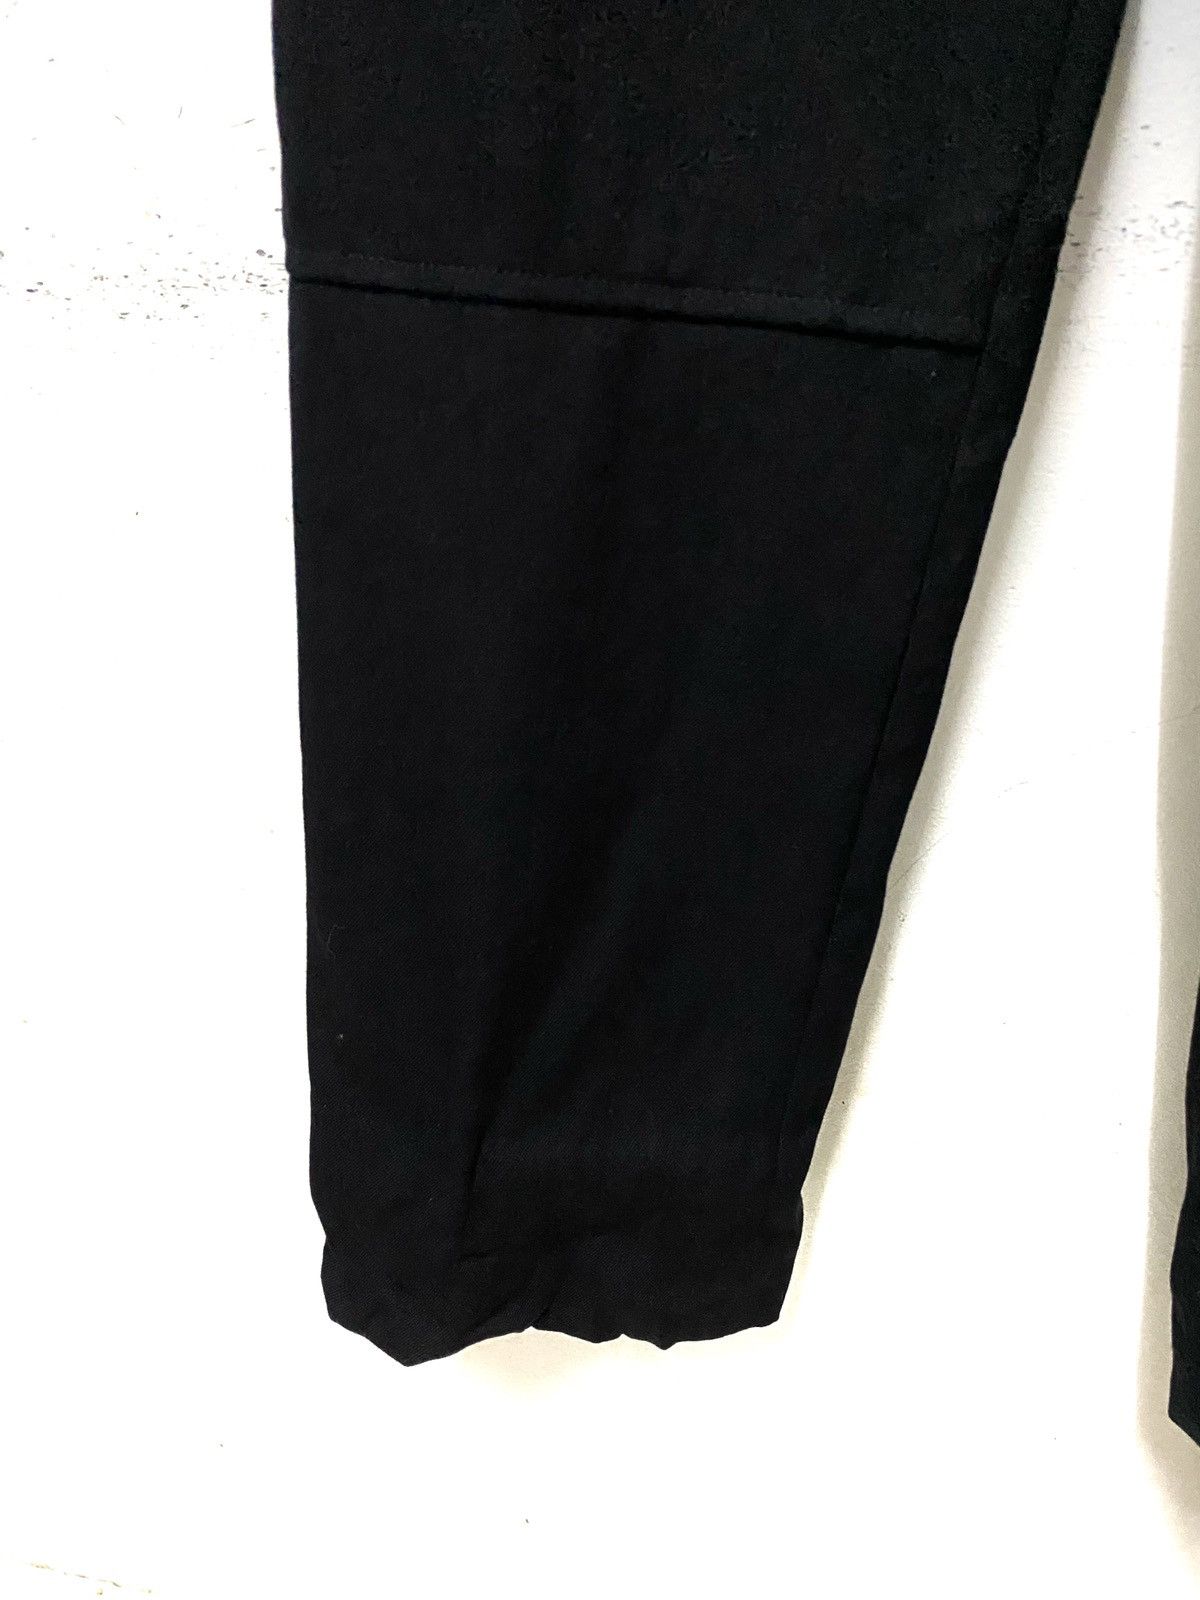 Gucci Lana Wool Pants Made in Italy - 4